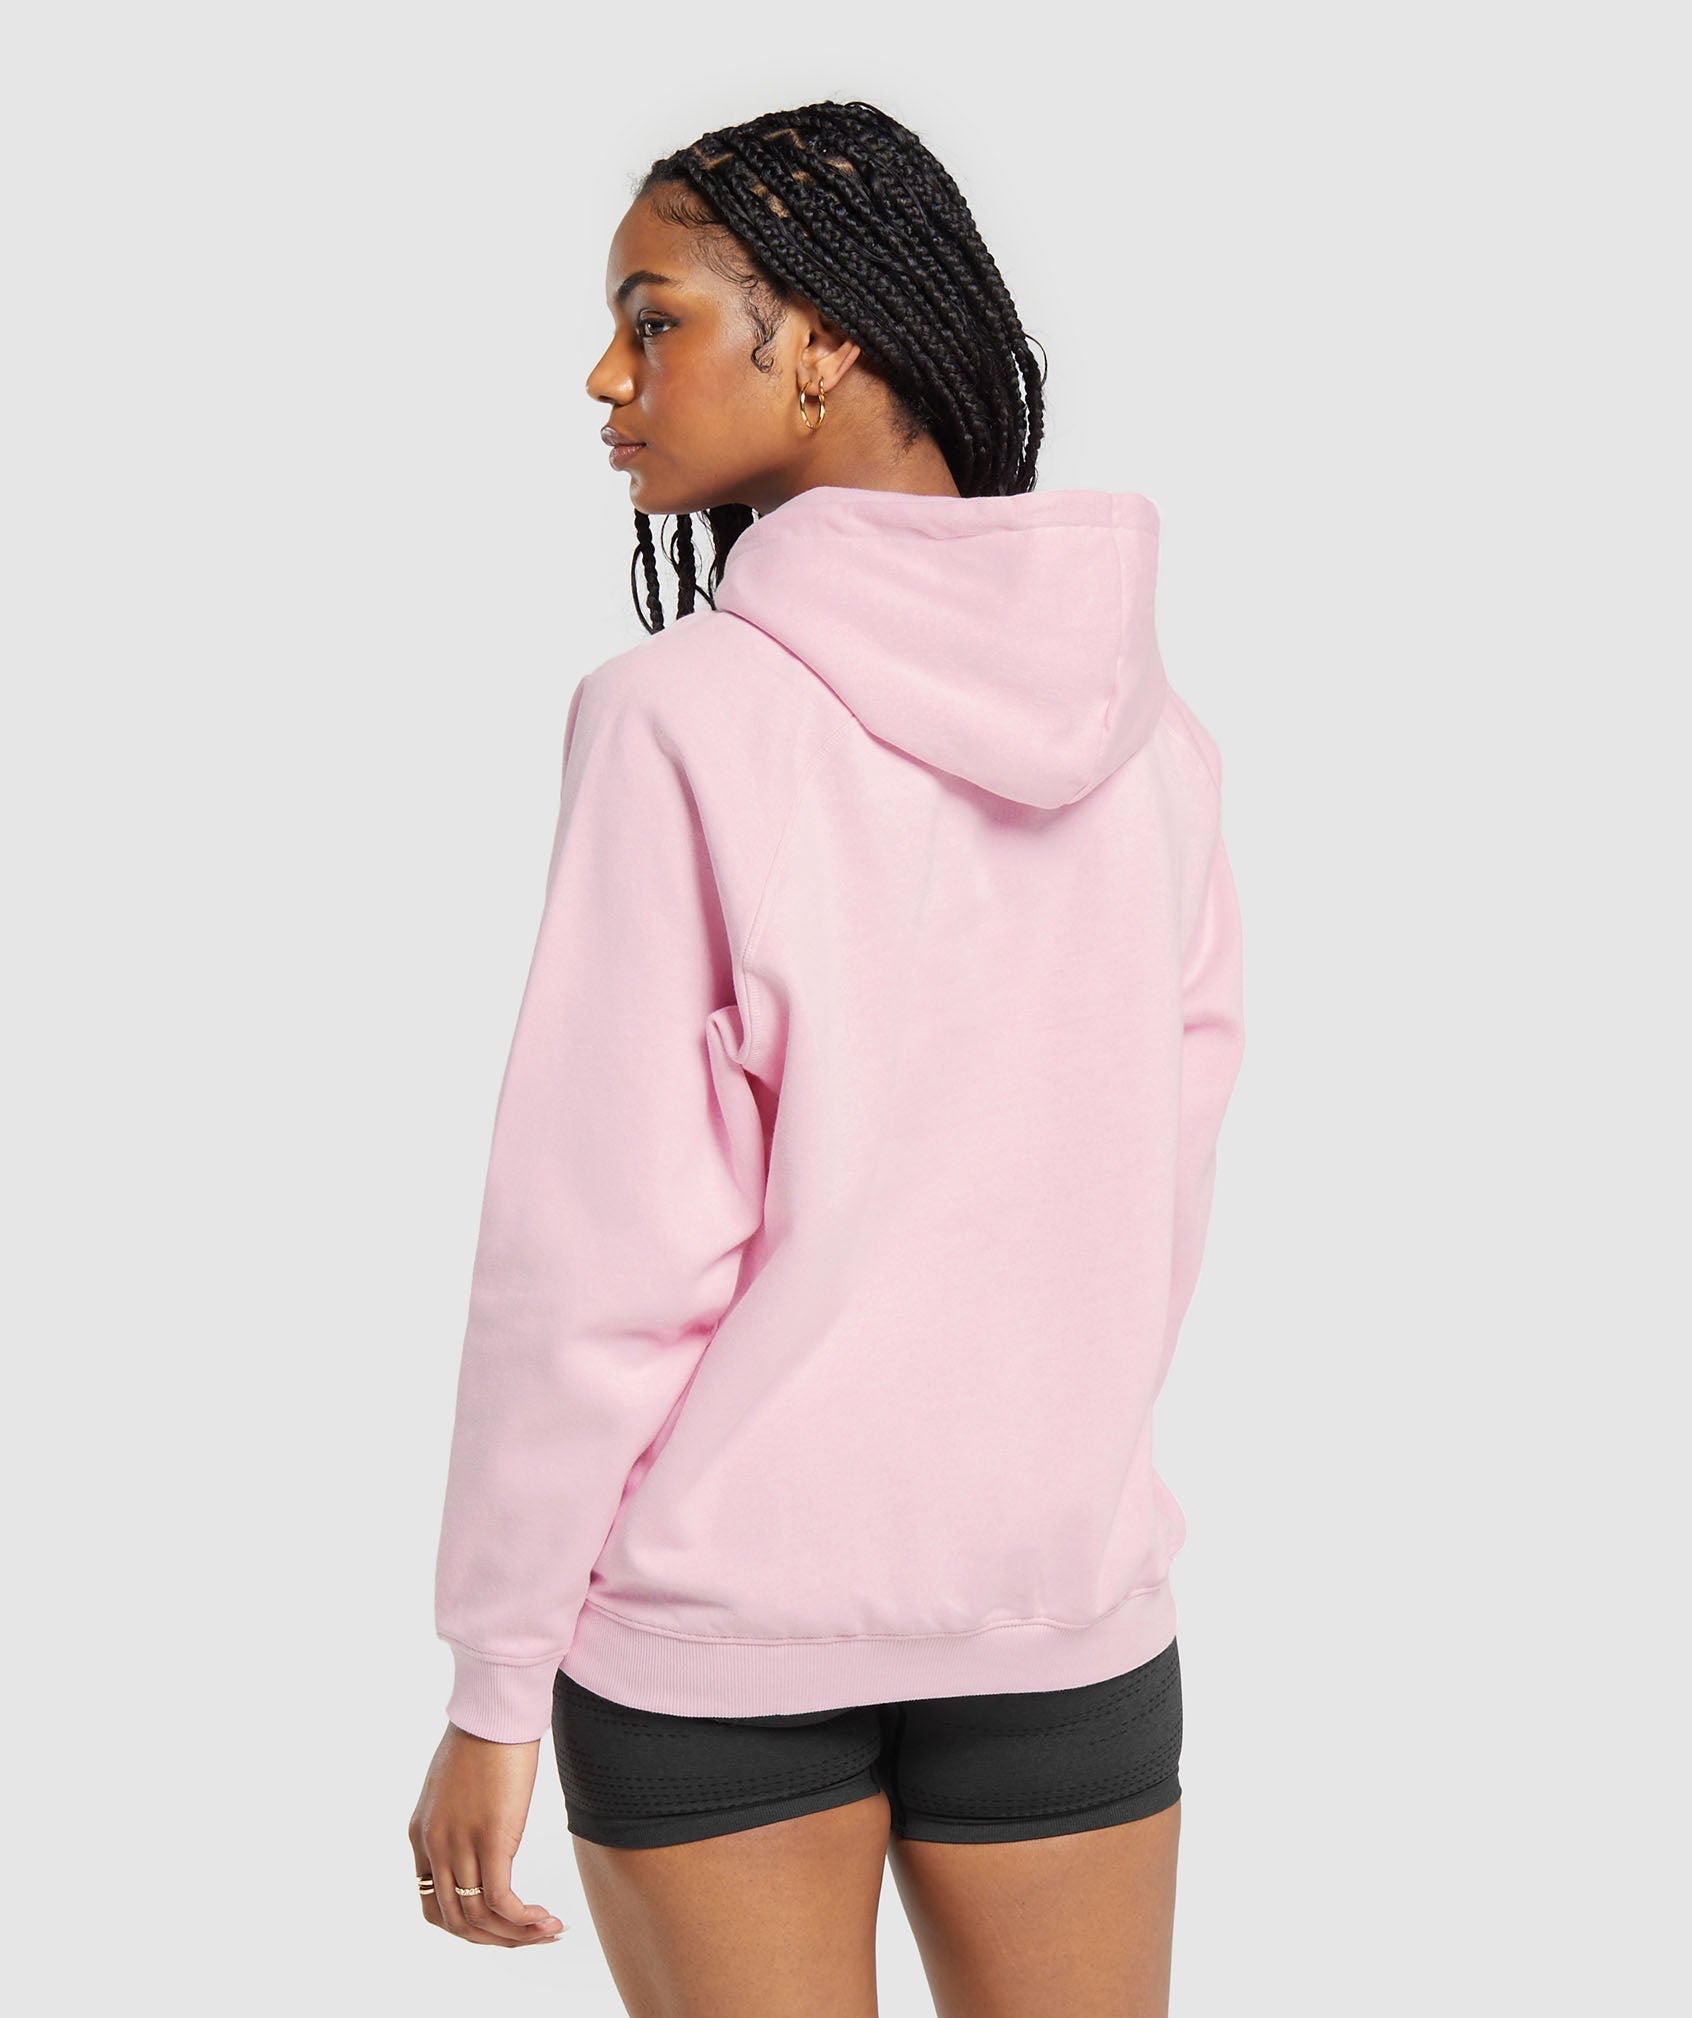 Training Oversized Fleece Hoodie in Dolly Pink - view 2